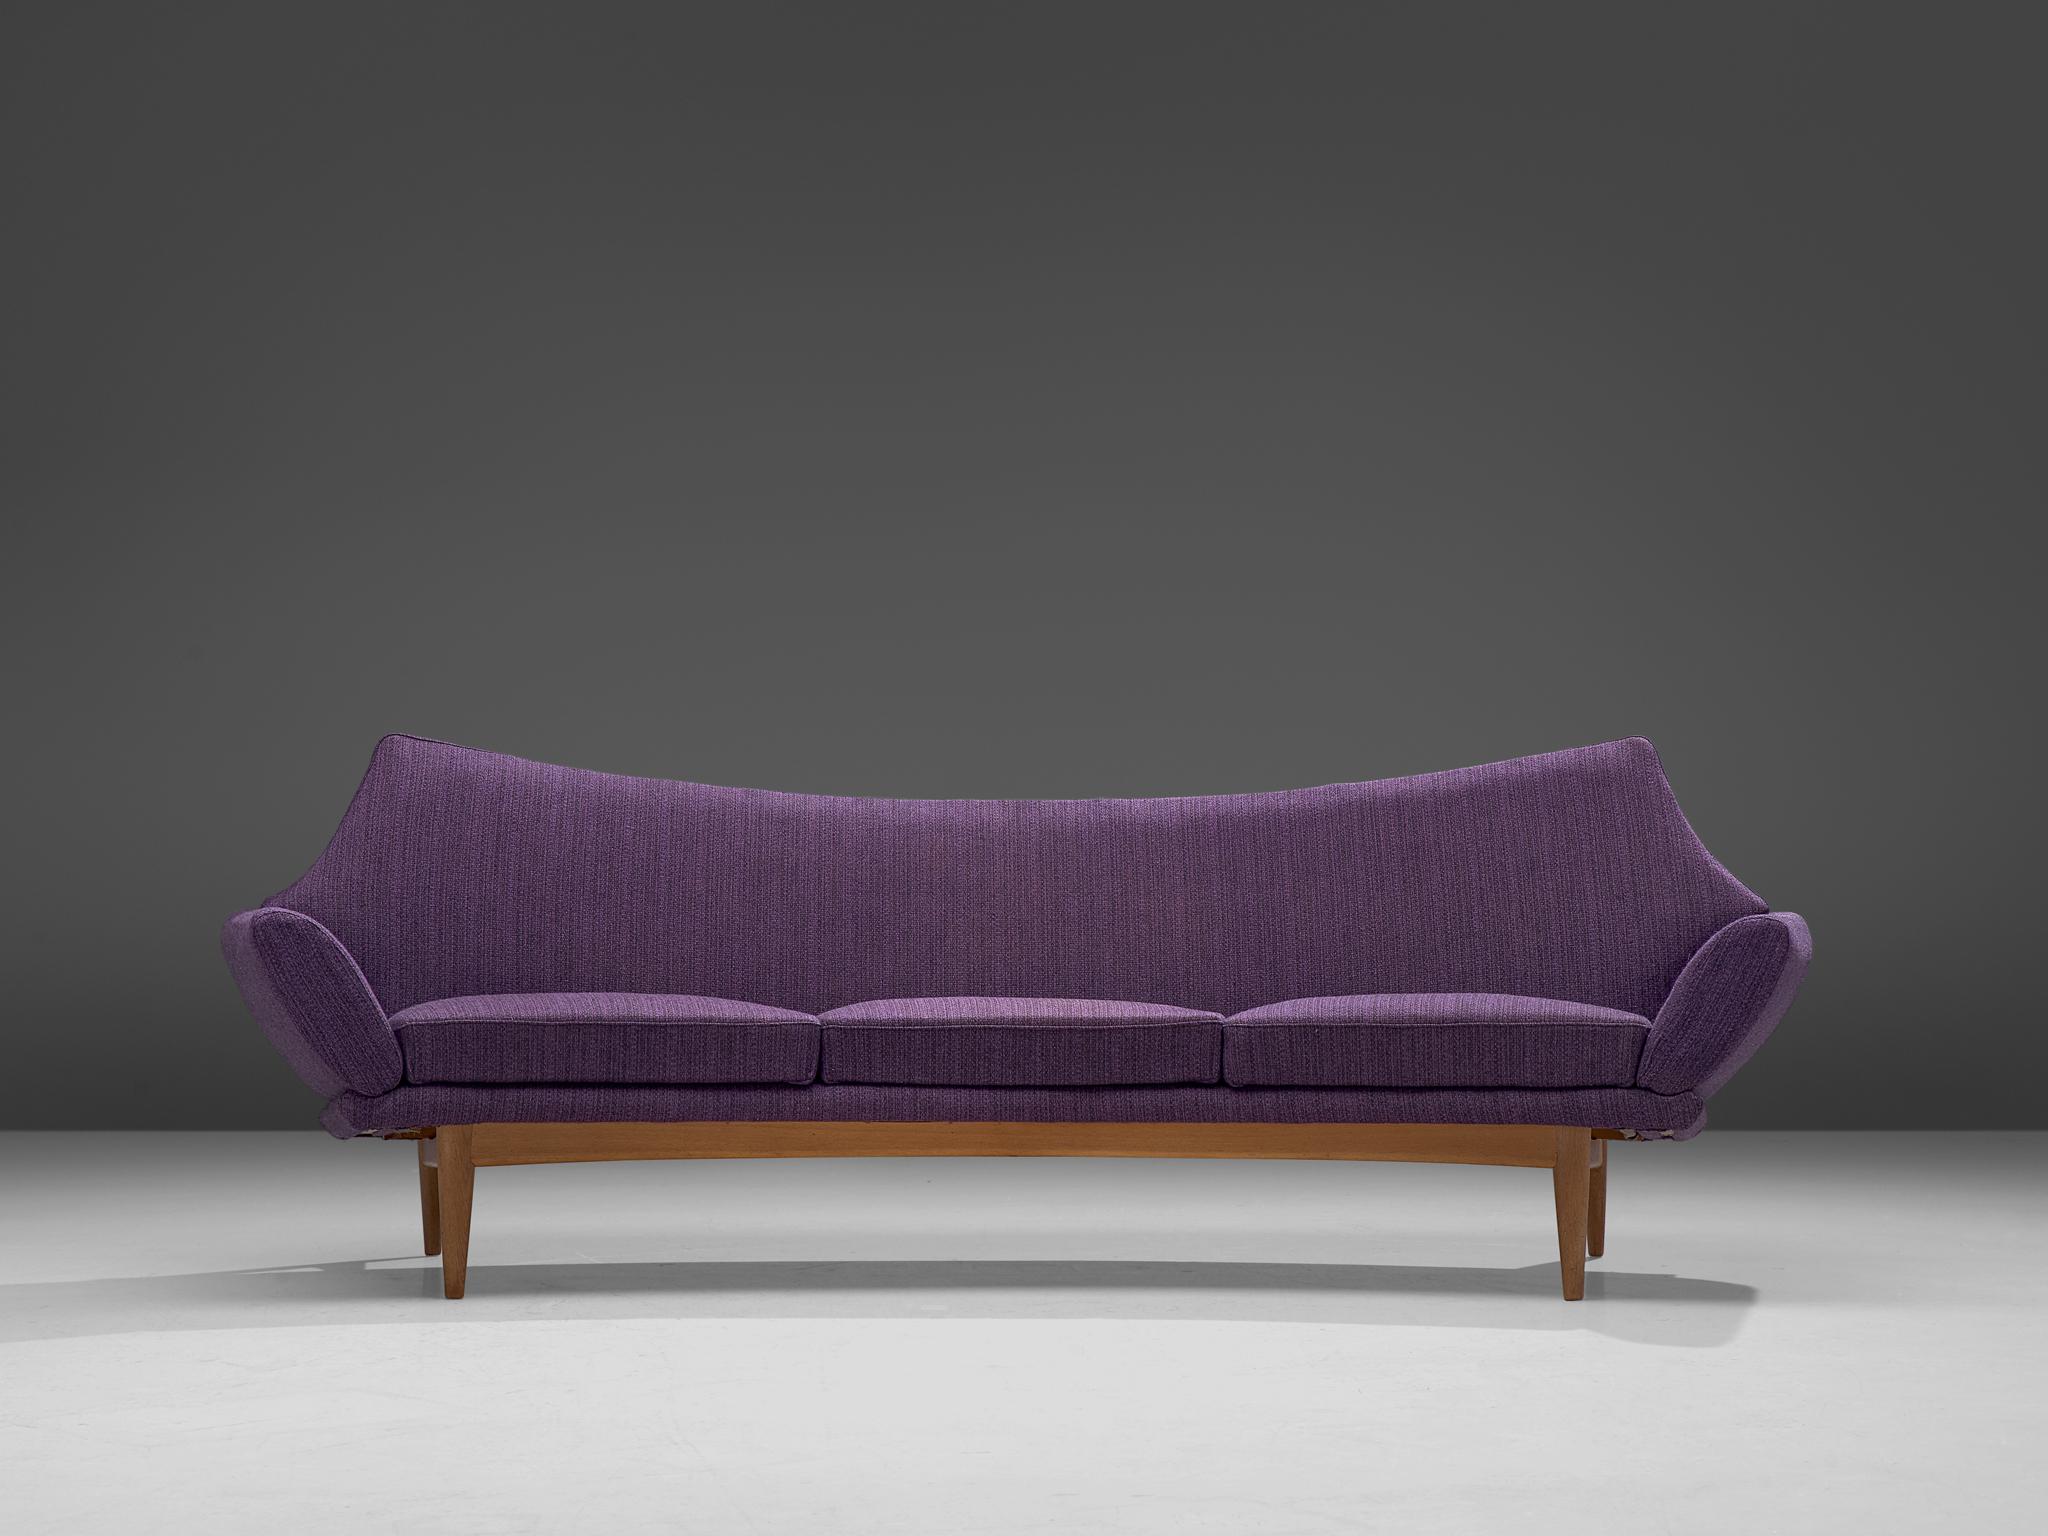 Johannes Andersen for Trensums Fatöljfabrik, sofa, fabric and oak, Sweden, 1960s

Swedish three-seat sofa designed by Johannes Andersen in the 1960s. The curved sofa features a striking design with almost complete absence of straight lines. The